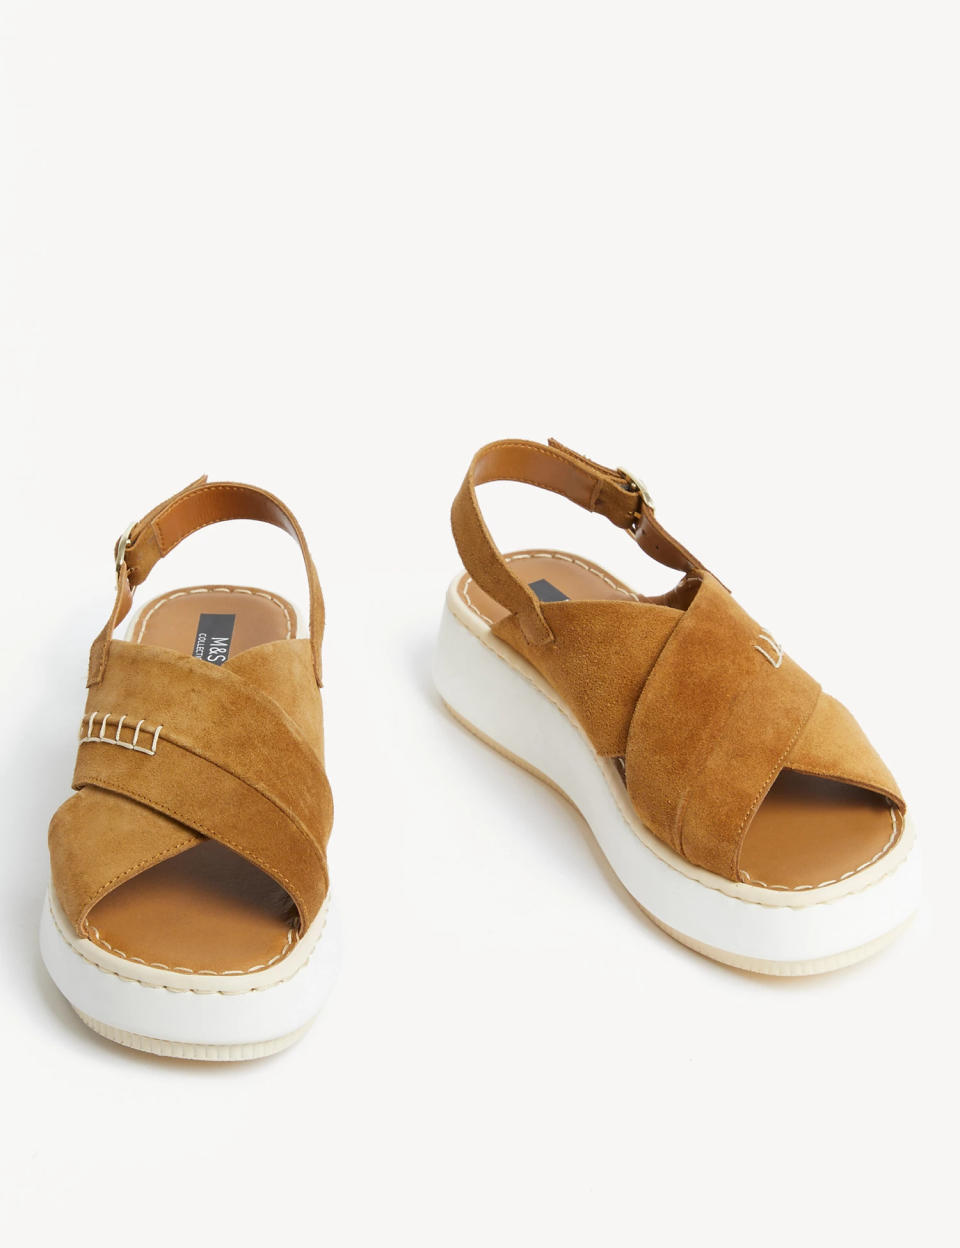 Chunky soled sandals like these are a big hit this summer. (M&S)